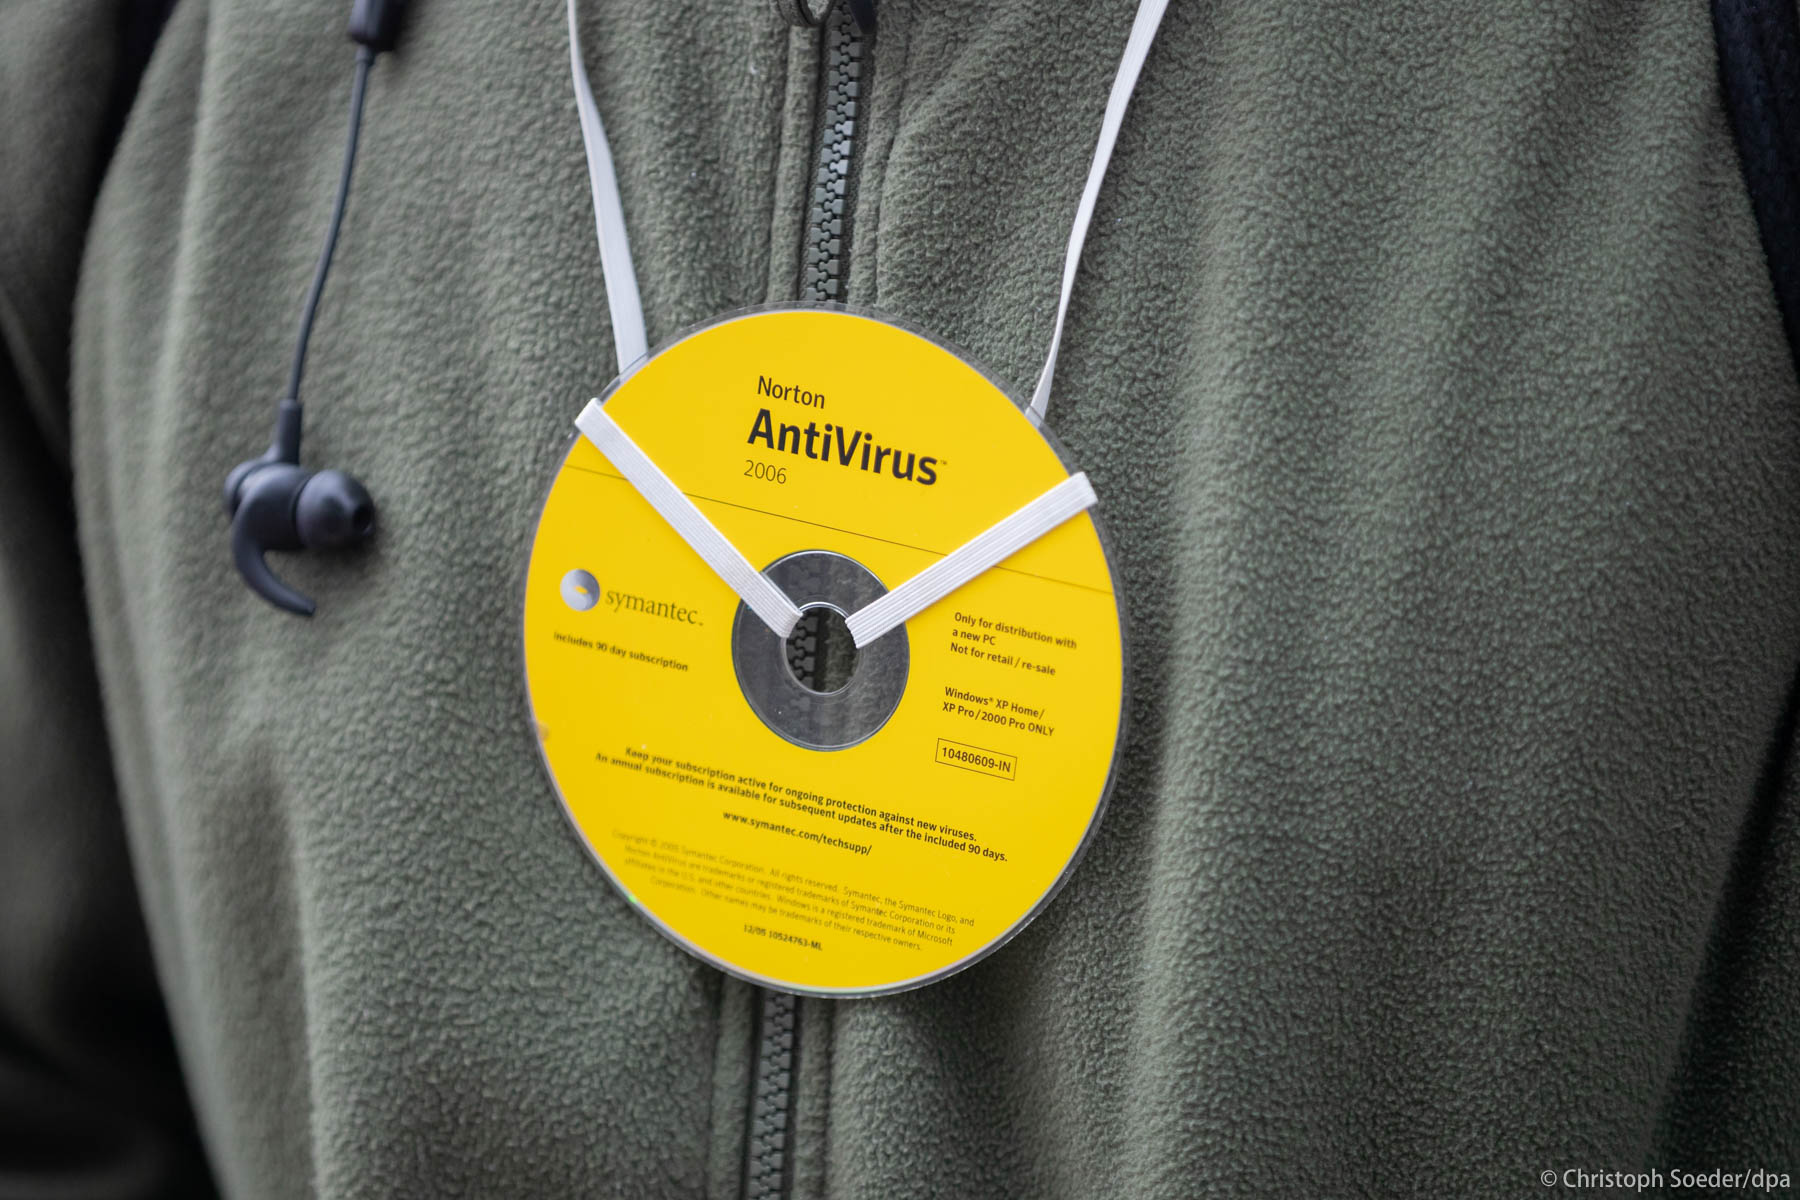 A person wearing an anti virus CD around the neck takes part in a protest against coronavirus pandemic regulations in Berlin.